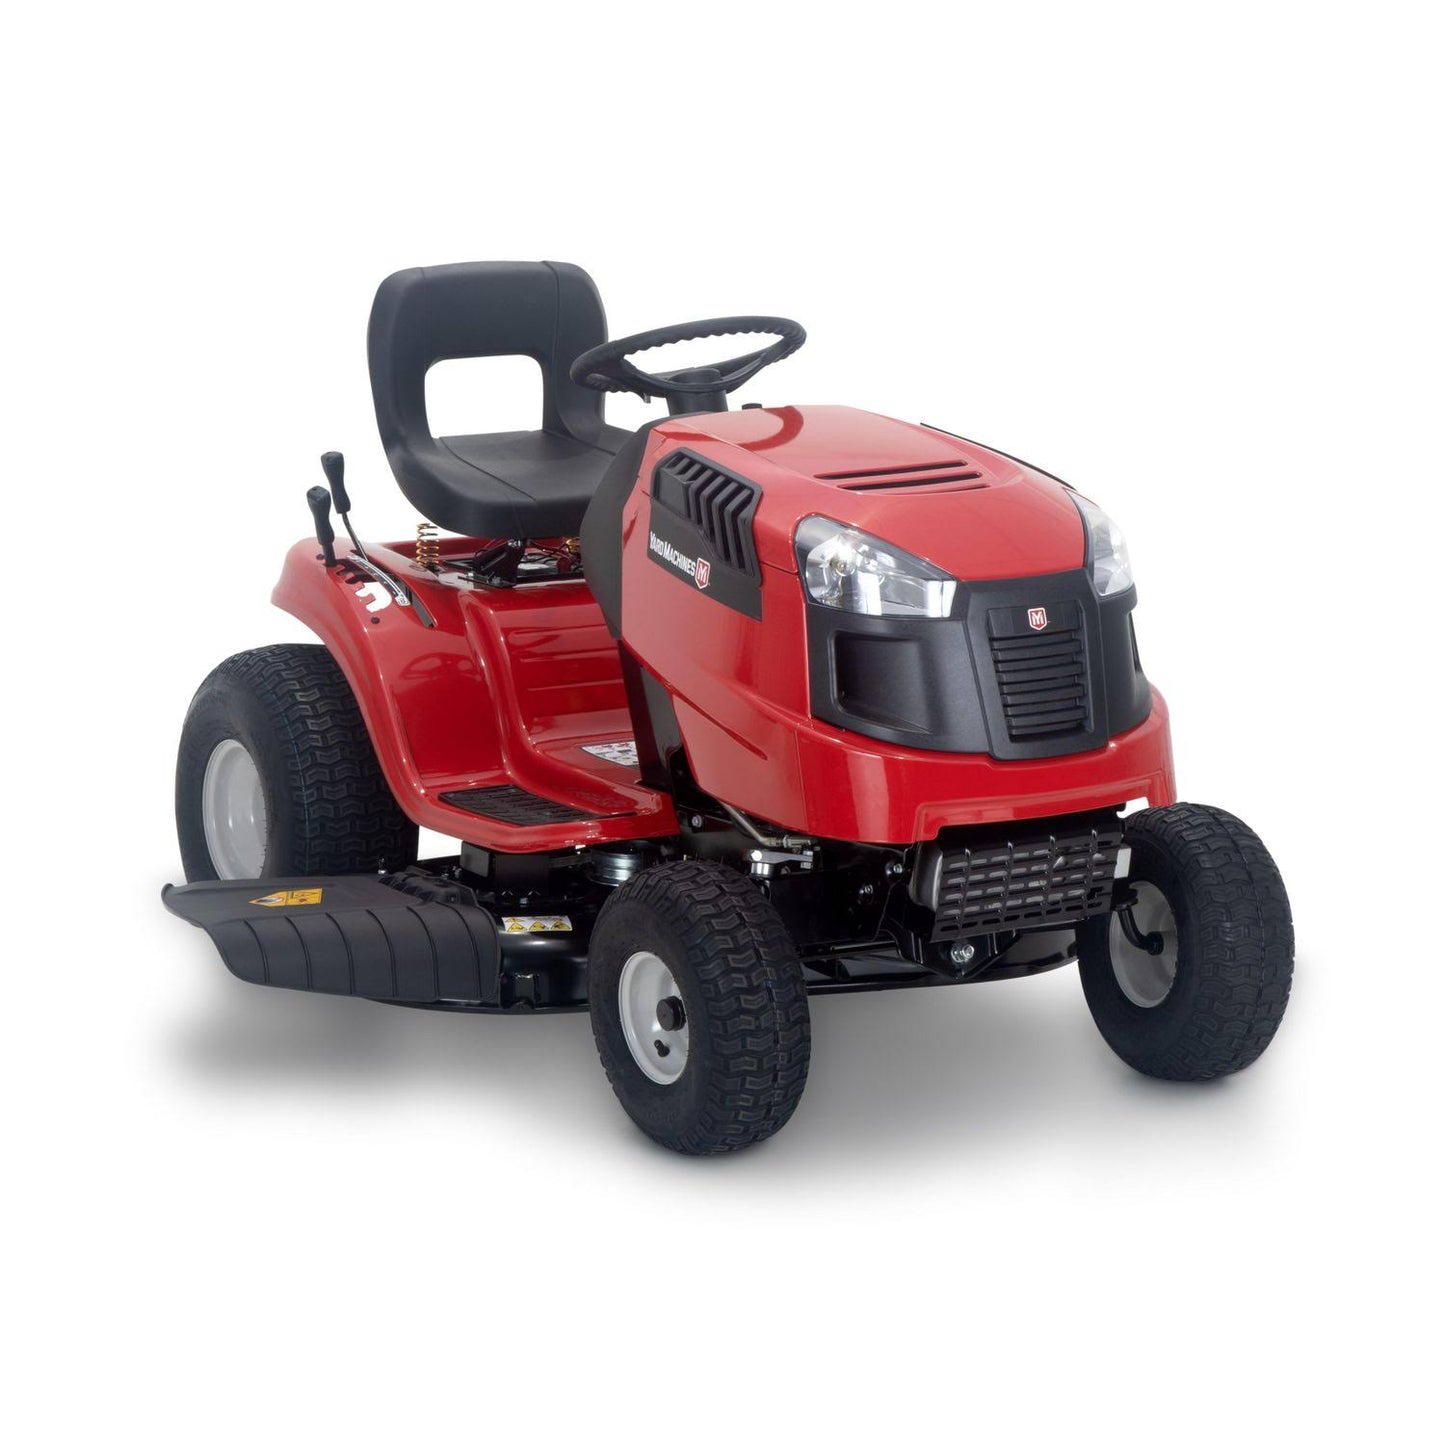 Yard Machines 42-in Riding Lawn Mower with 500cc Briggs & Stratton GAS Powered Engine